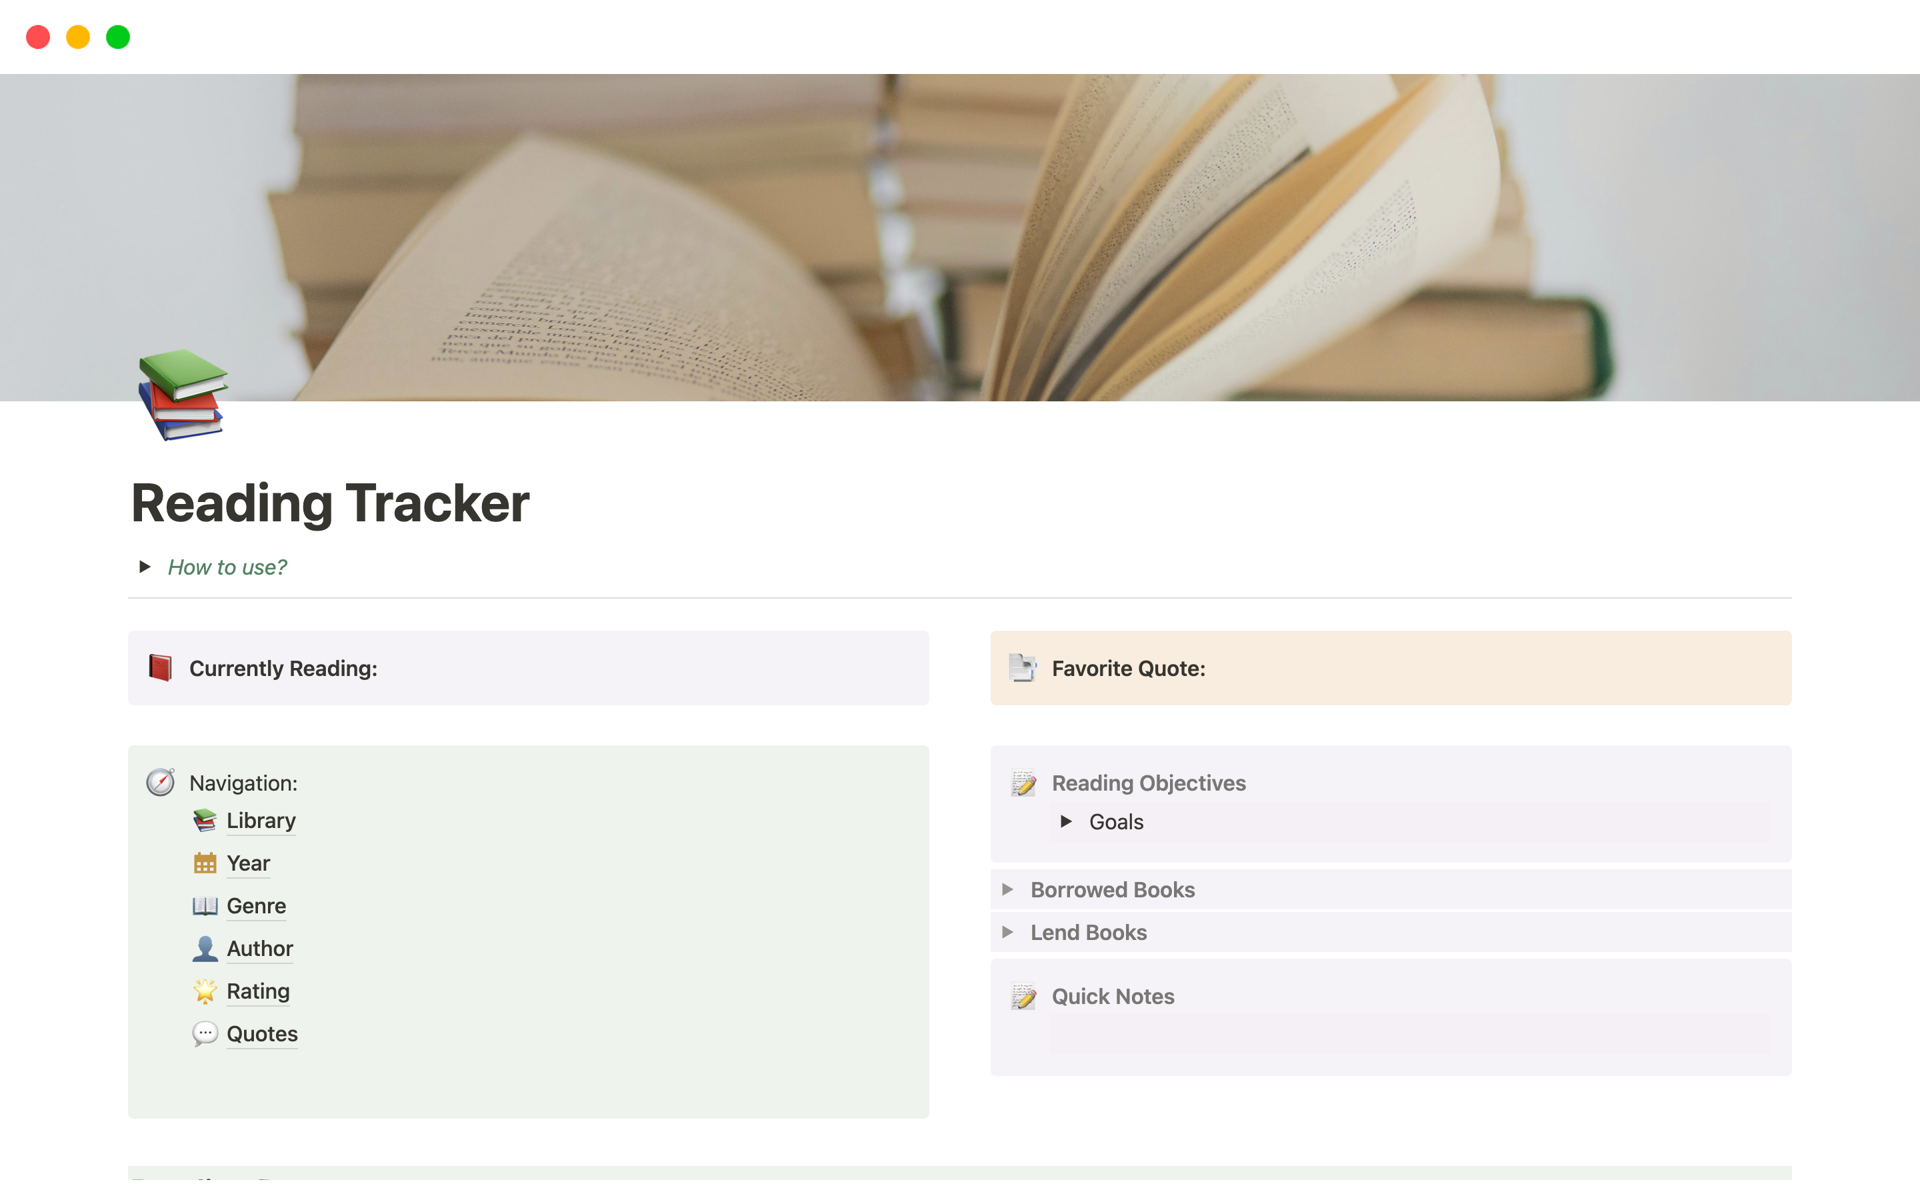 Experience the magic of a perfectly organized digital library with Reading Tracker.